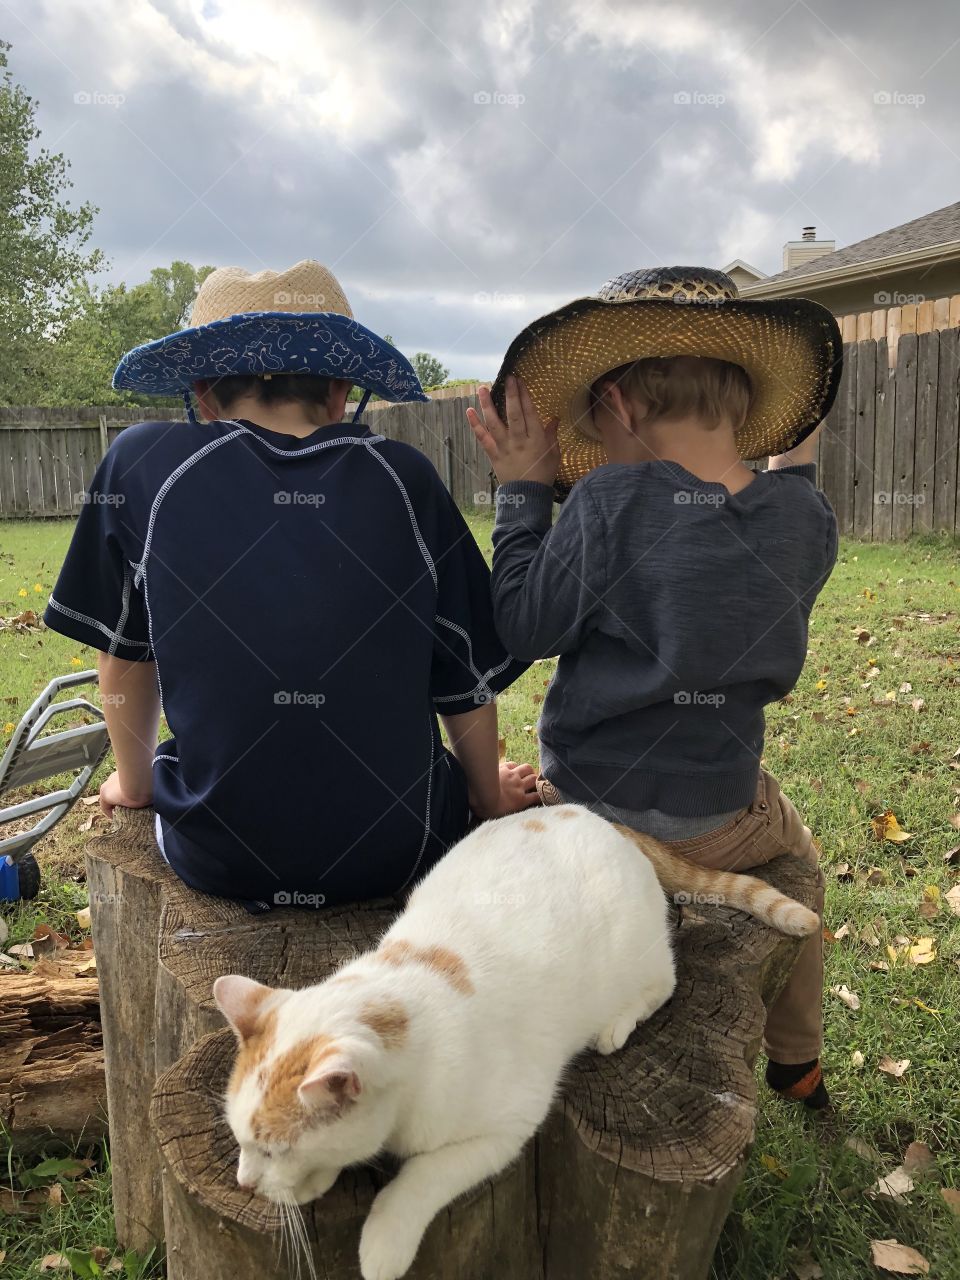 Cowboys and their cat